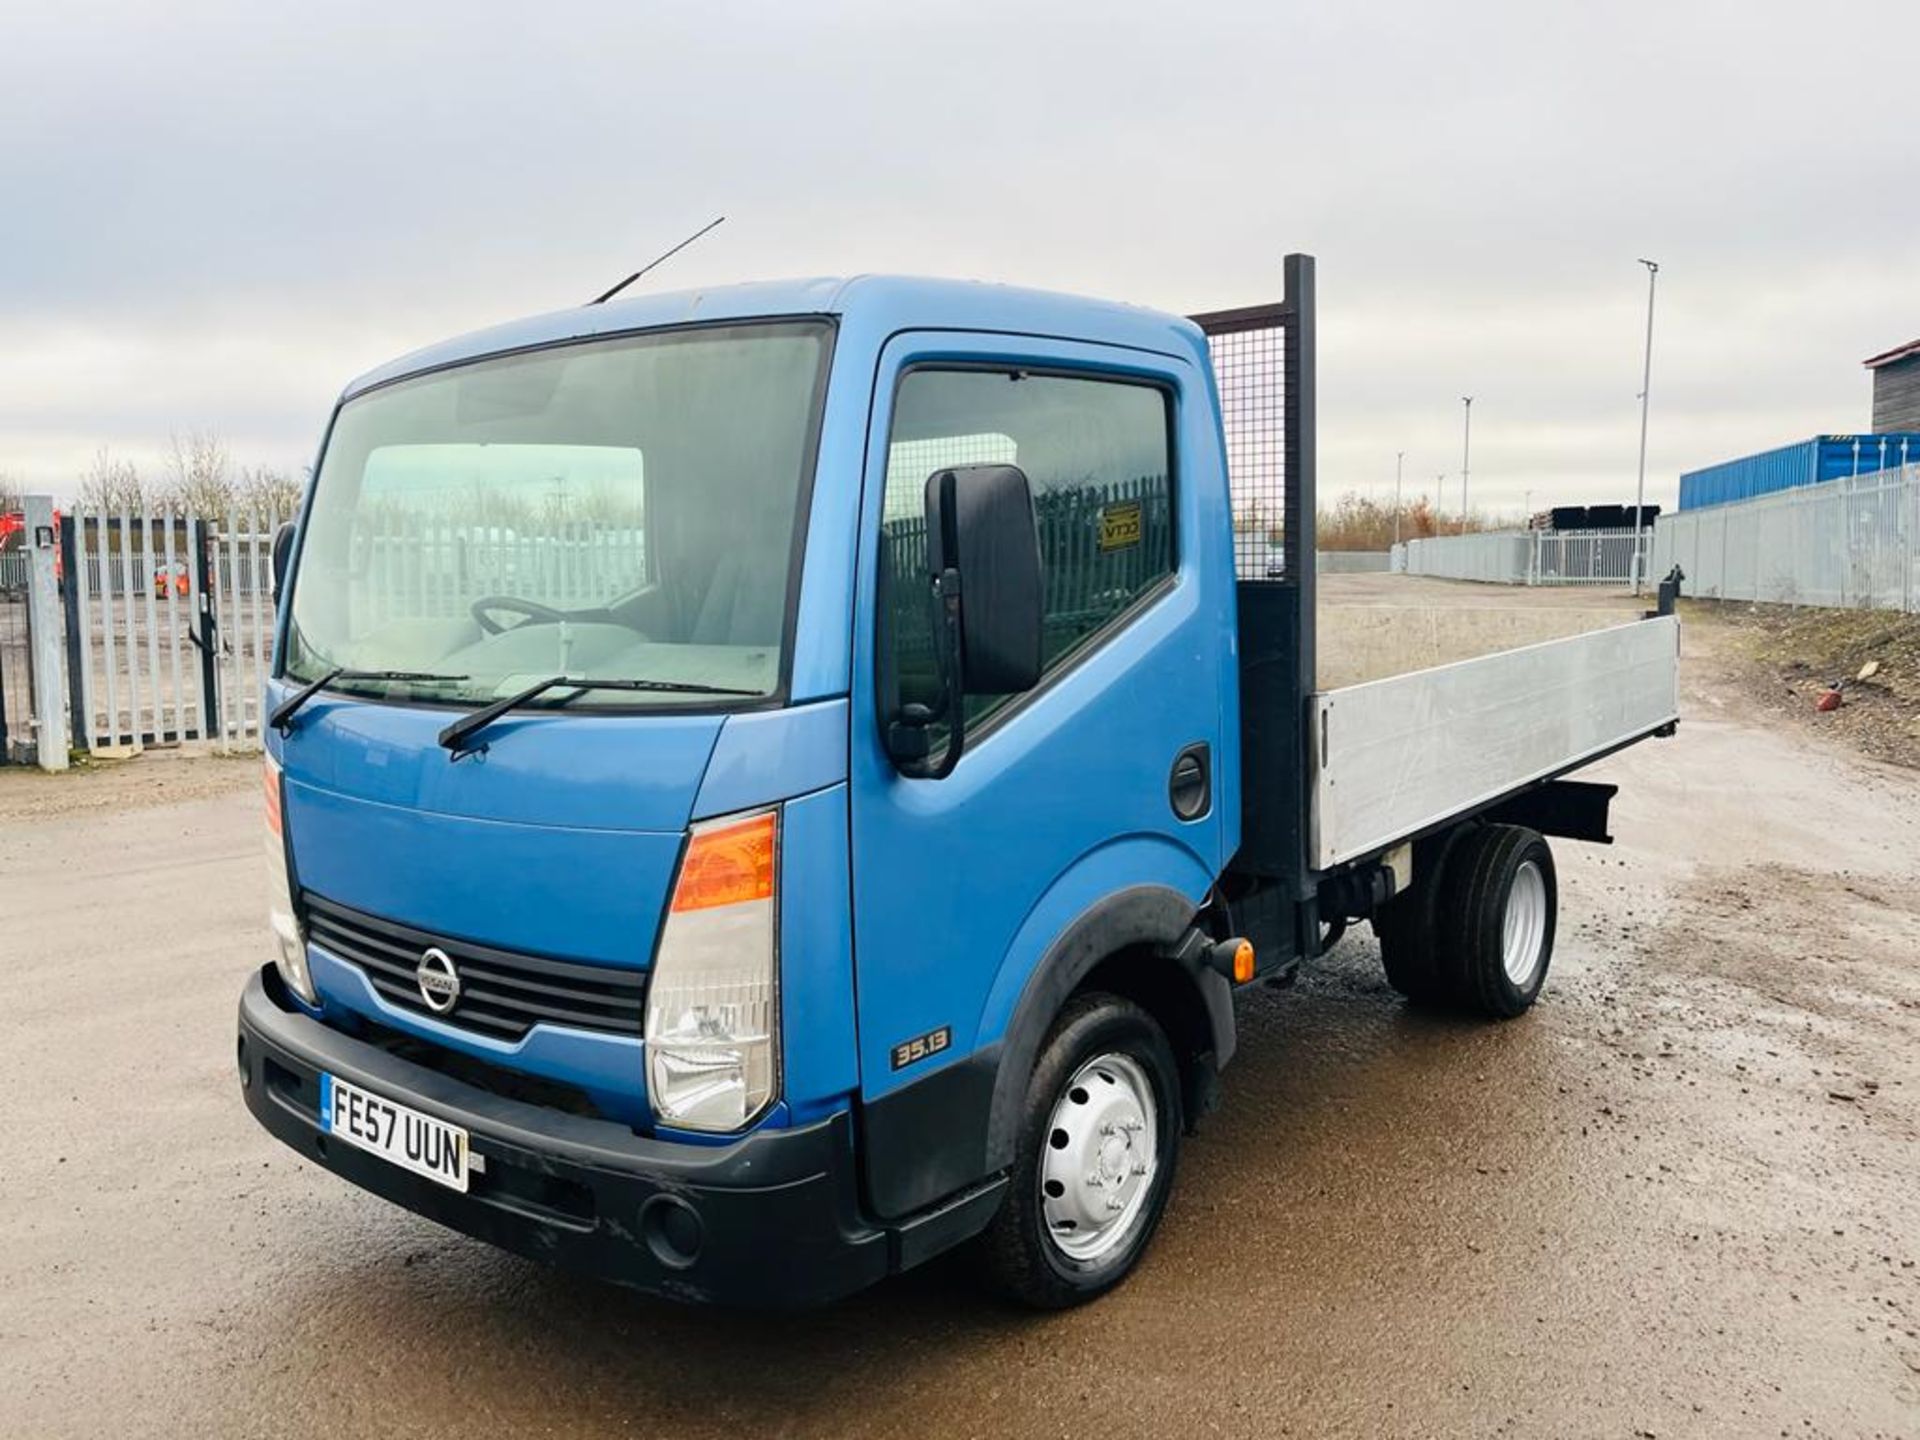 ** ON SALE **Nissan CabStar 2.5 DCI Alloy Tipper Twin Axle 2007 '57 Reg' No Vat - Image 3 of 23